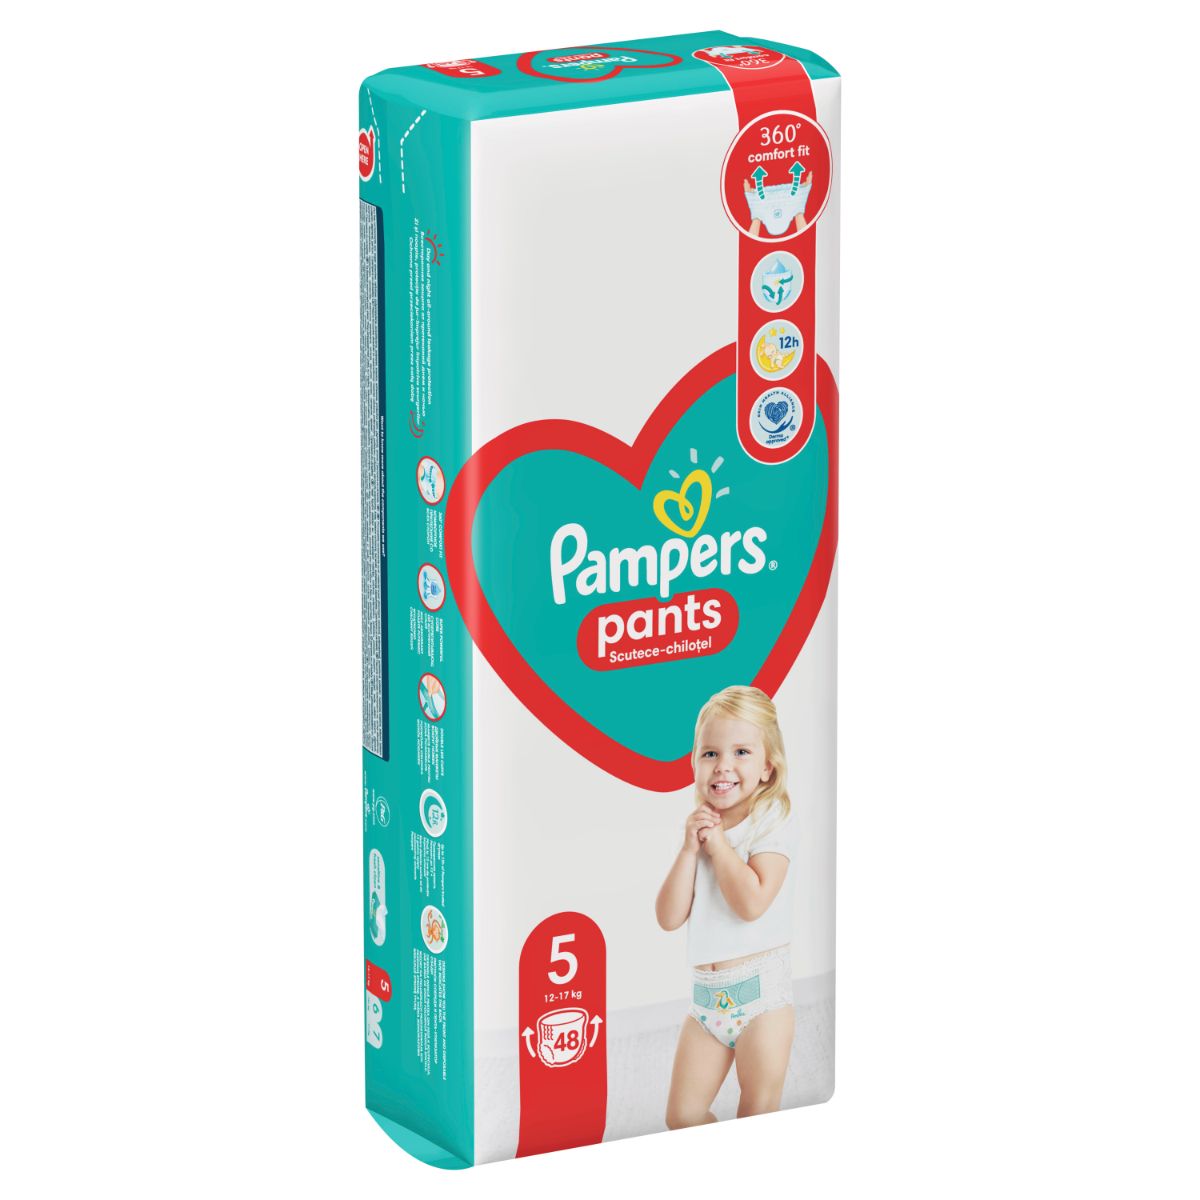 Scutece Pampers 5 Chilotel Act Baby, 12-17 kg, 48 buc